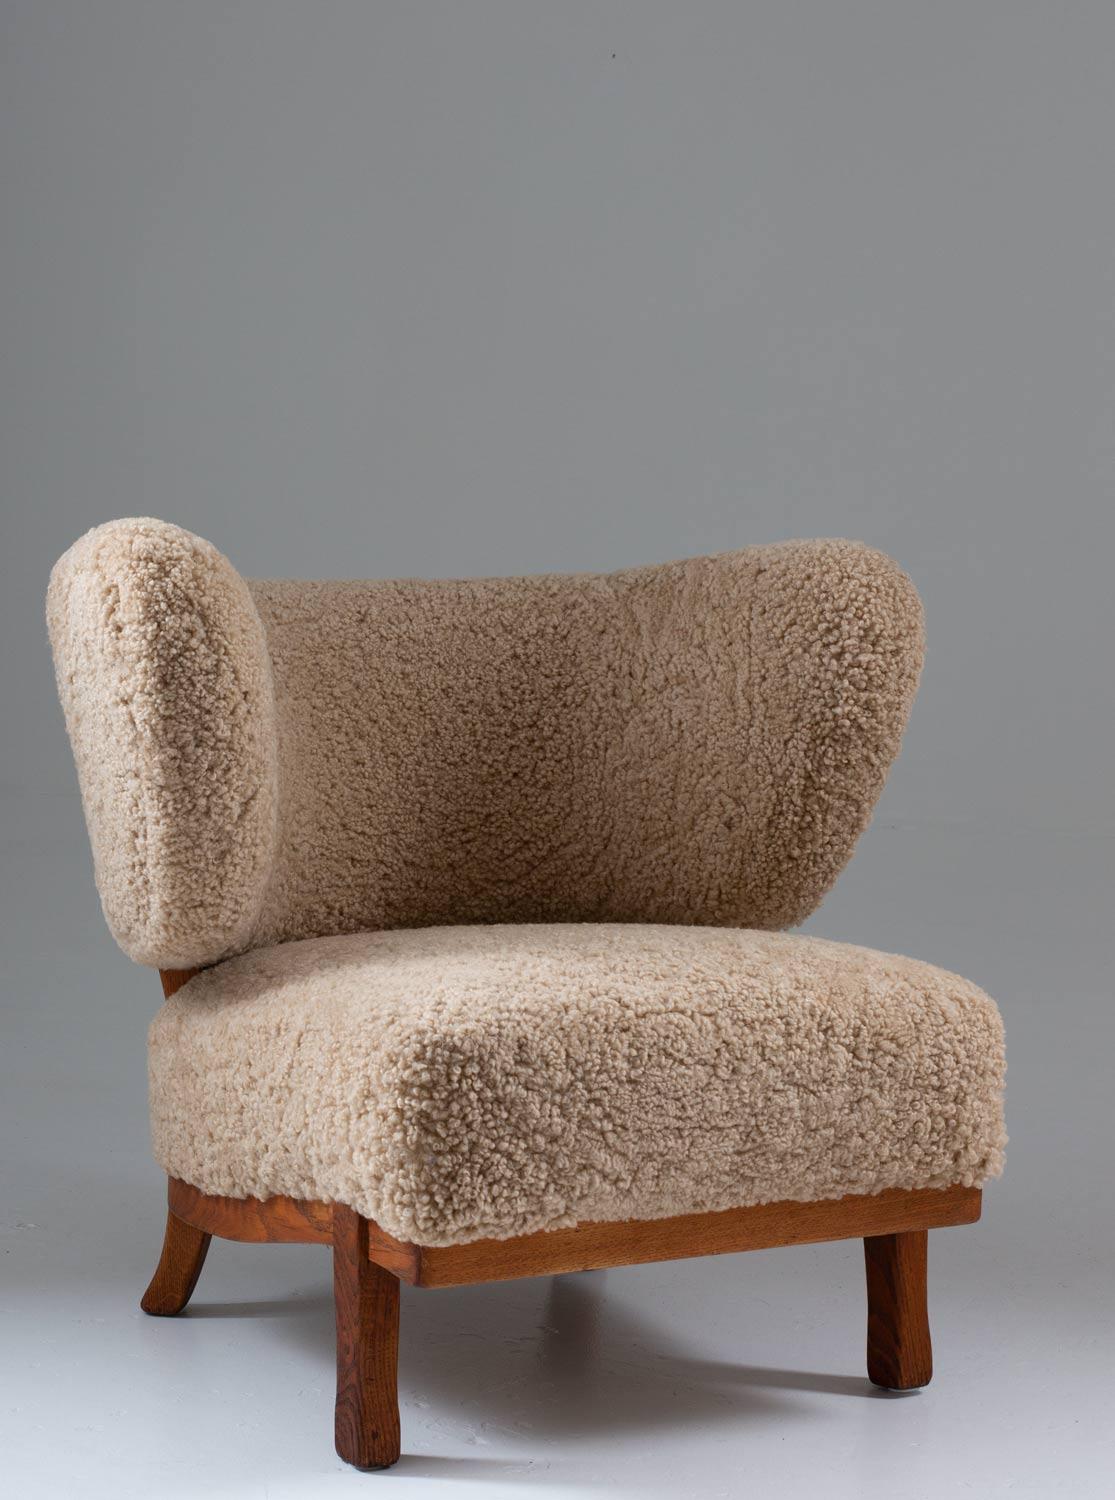 20th Century Swedish Modern Lounge Chair by Otto Shulz for Boet